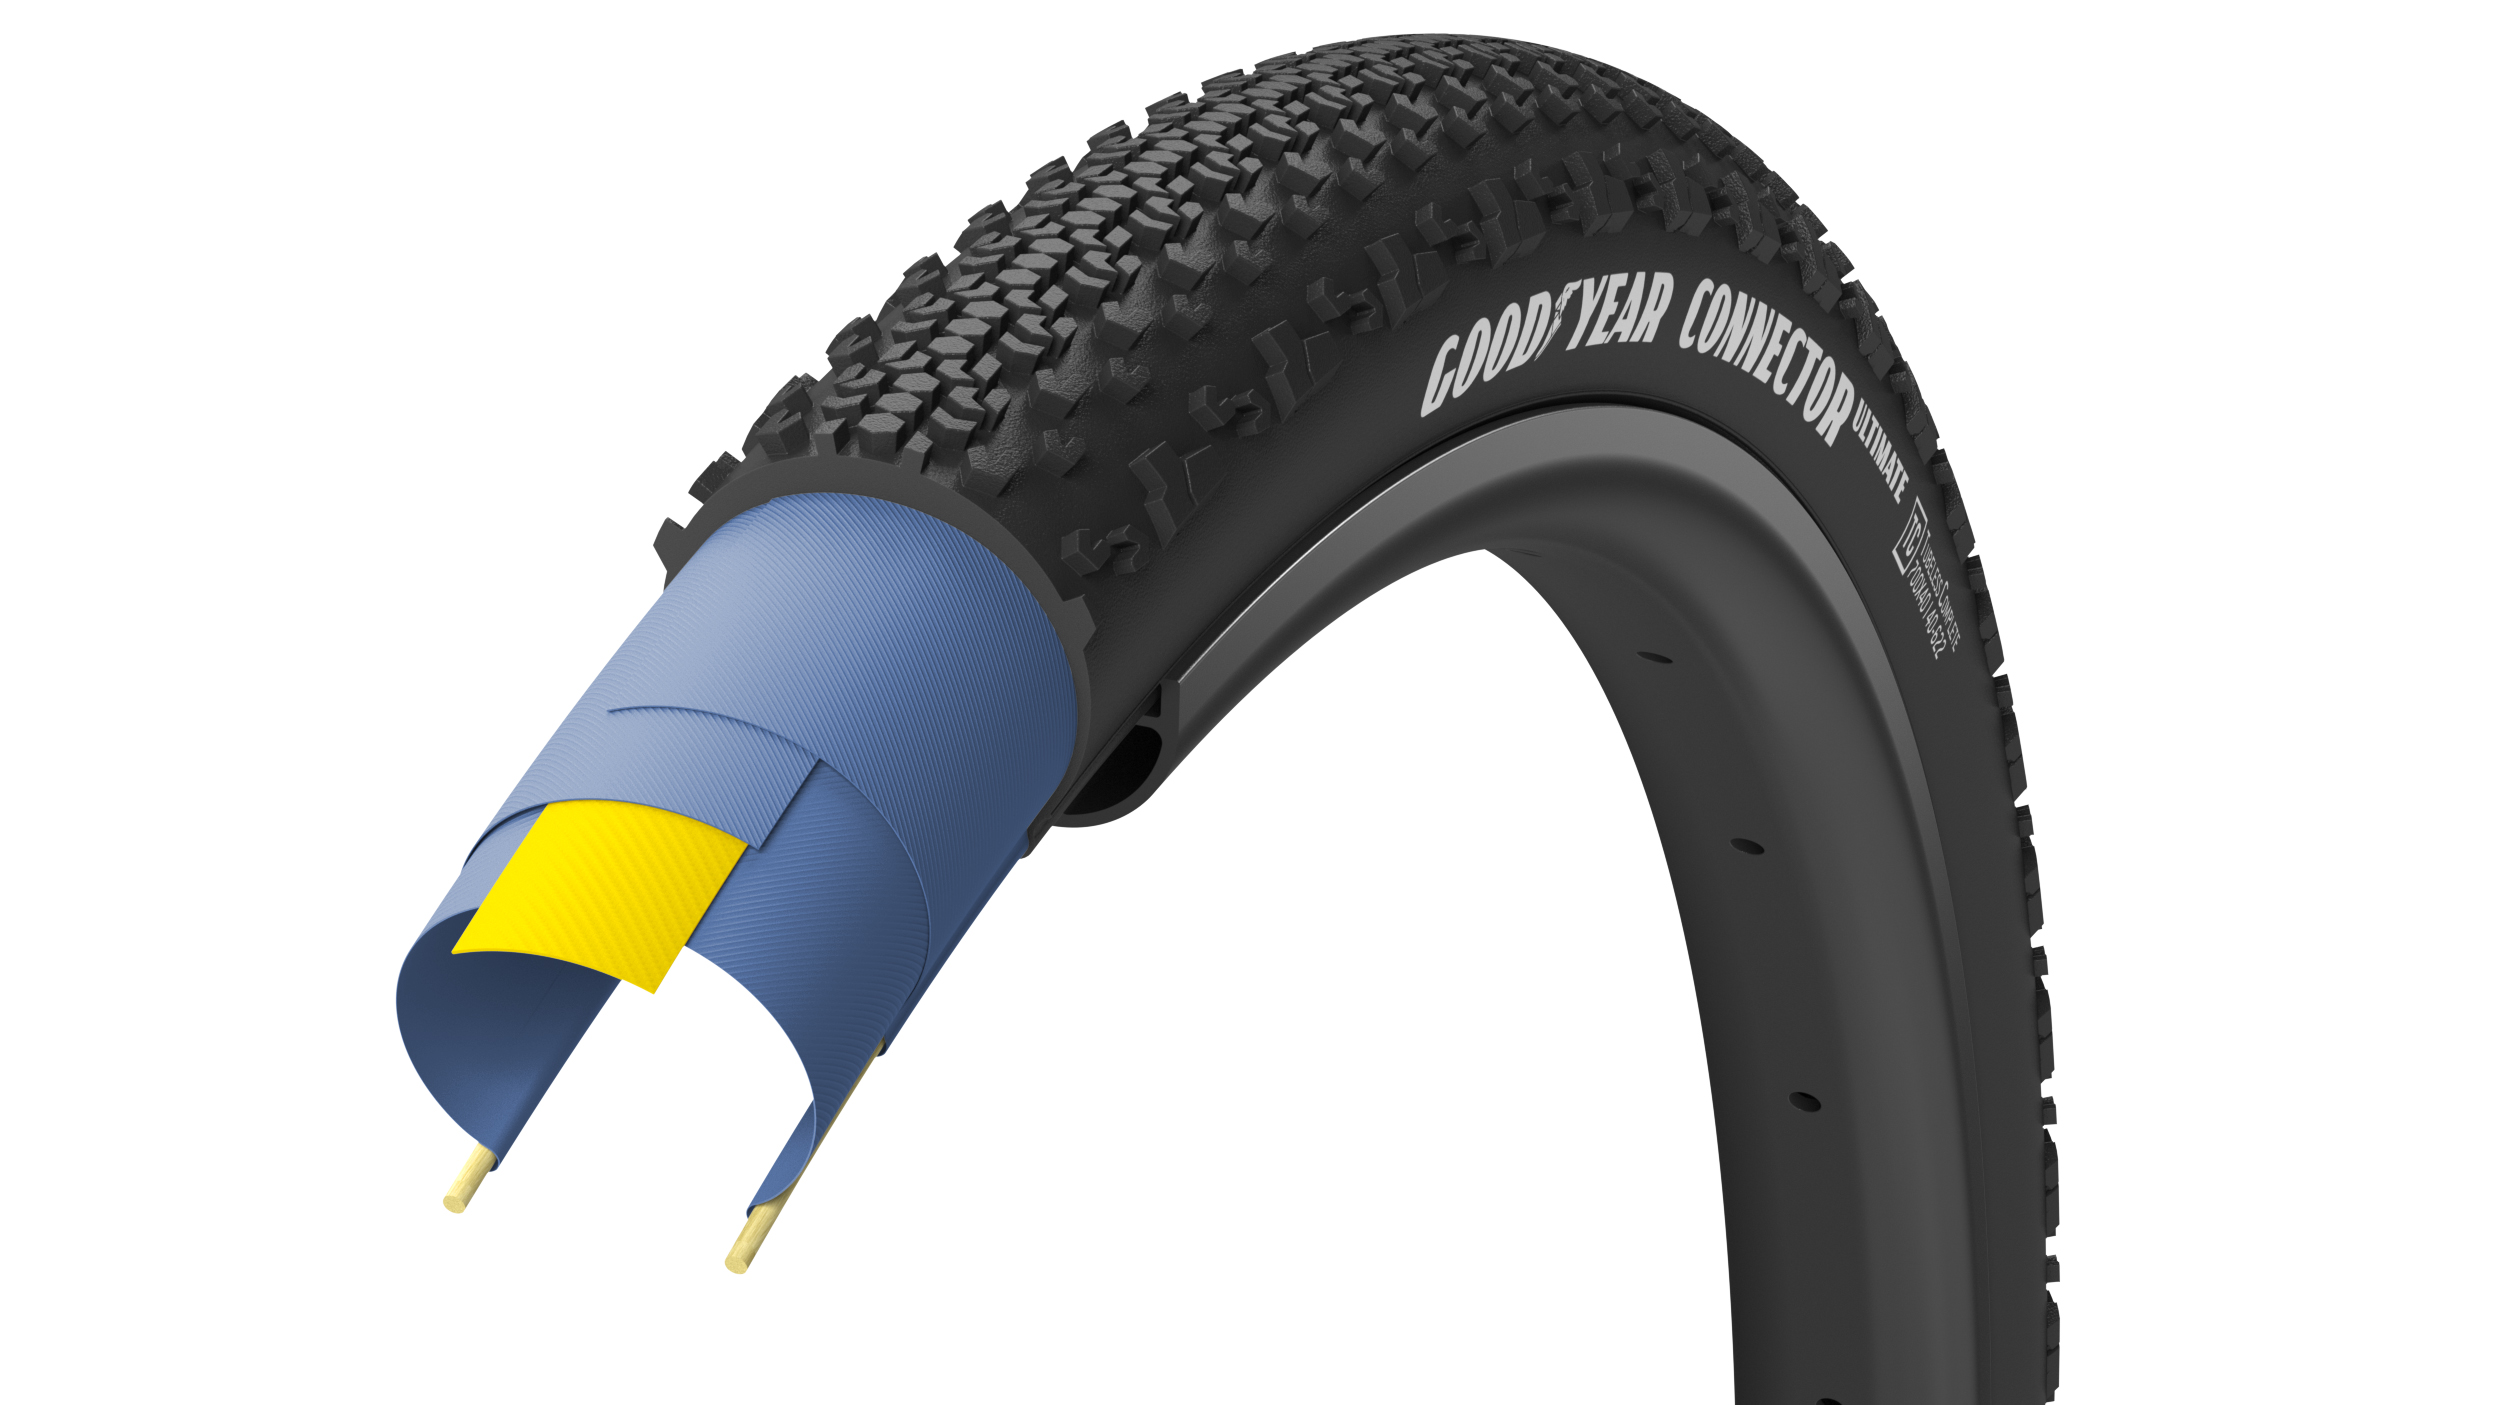 Покрышка 700x40 (40-622) GoodYear CONNECTOR tubeless complete, folding, black, 120tpi фото 